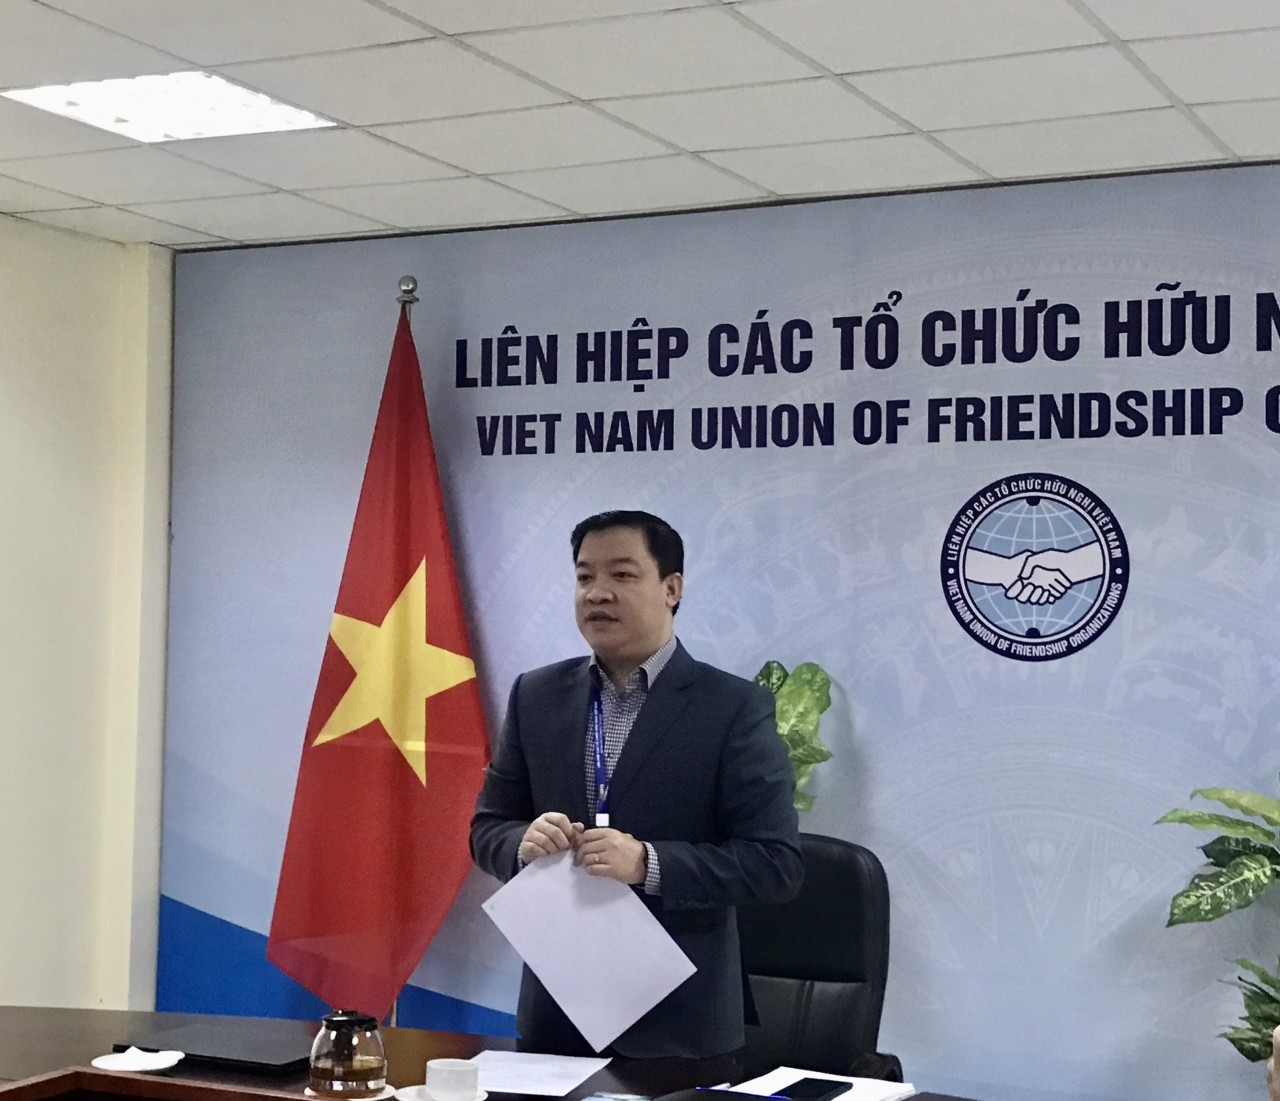 Quang Ngai Aims to Diversify Aid Mobilization Forms